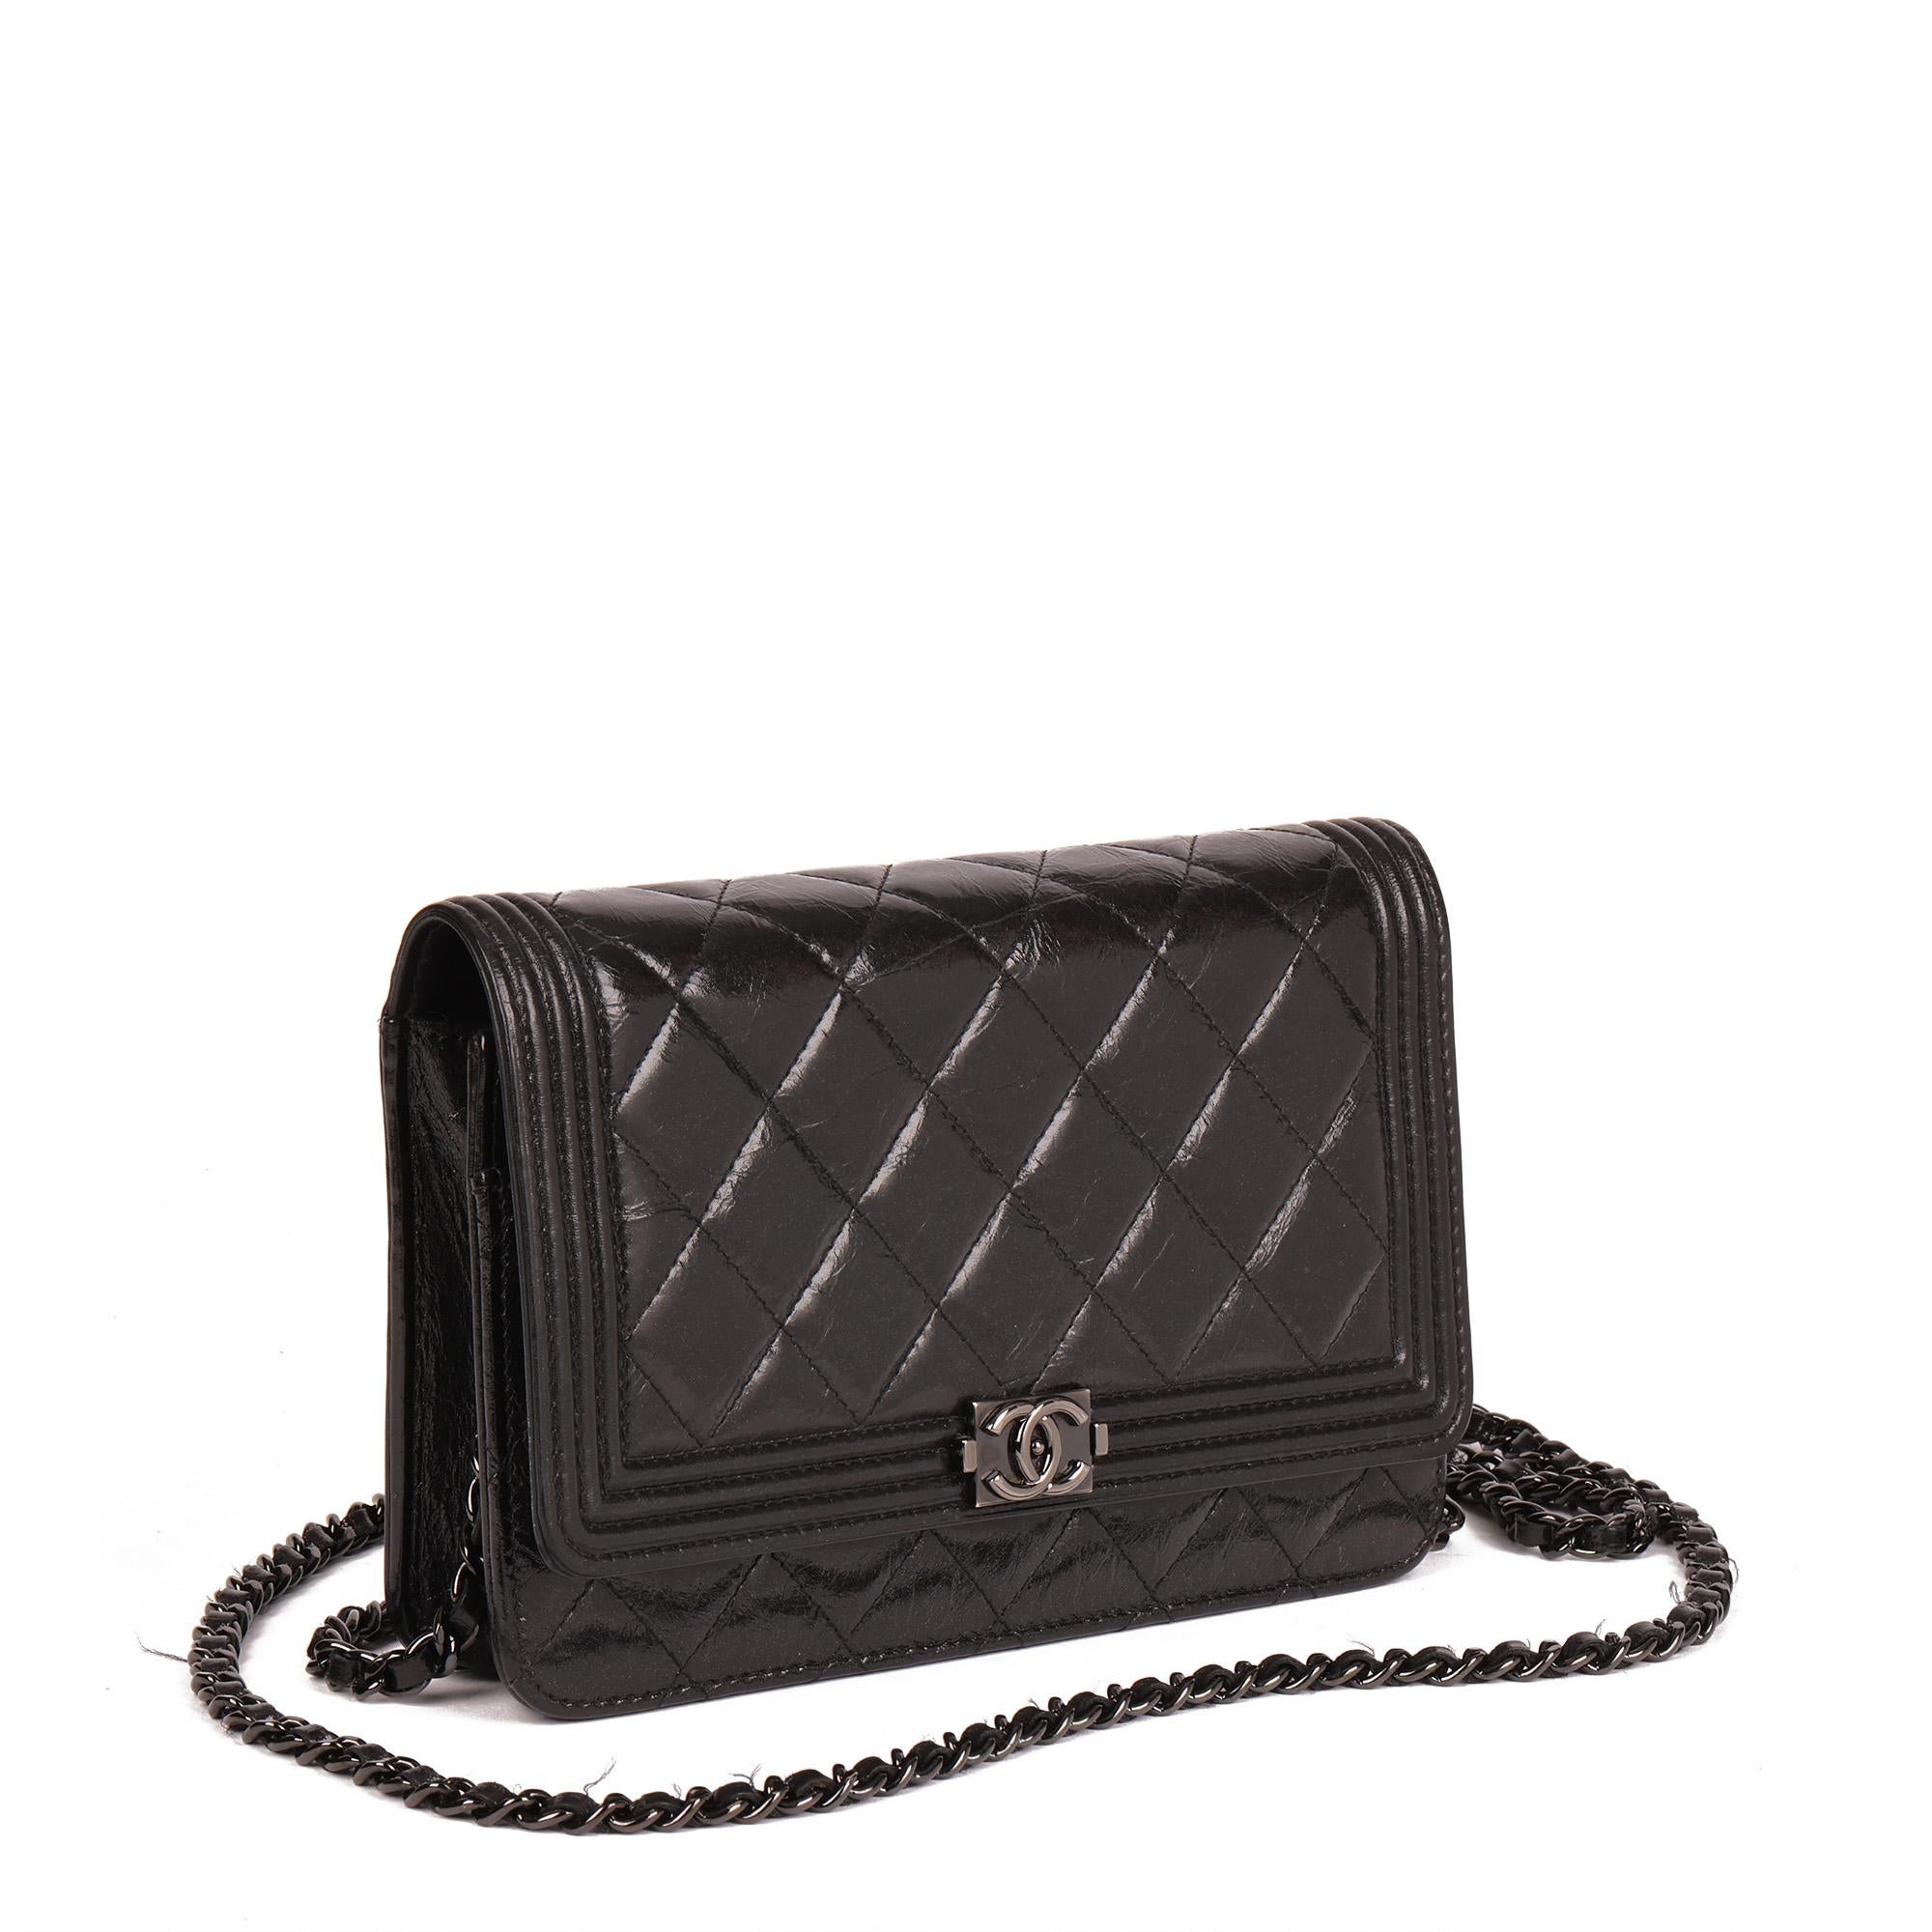 CHANEL
Black Quilted Aged Calfskin Leather SO Black Le Boy Wallet-on-Chain WOC

Xupes Reference: HB4623
Serial Number: 19807351
Age (Circa): 2014
Accompanied By: Chanel Dust Bag, Authenticity Card
Authenticity Details: Authenticity Card, Serial